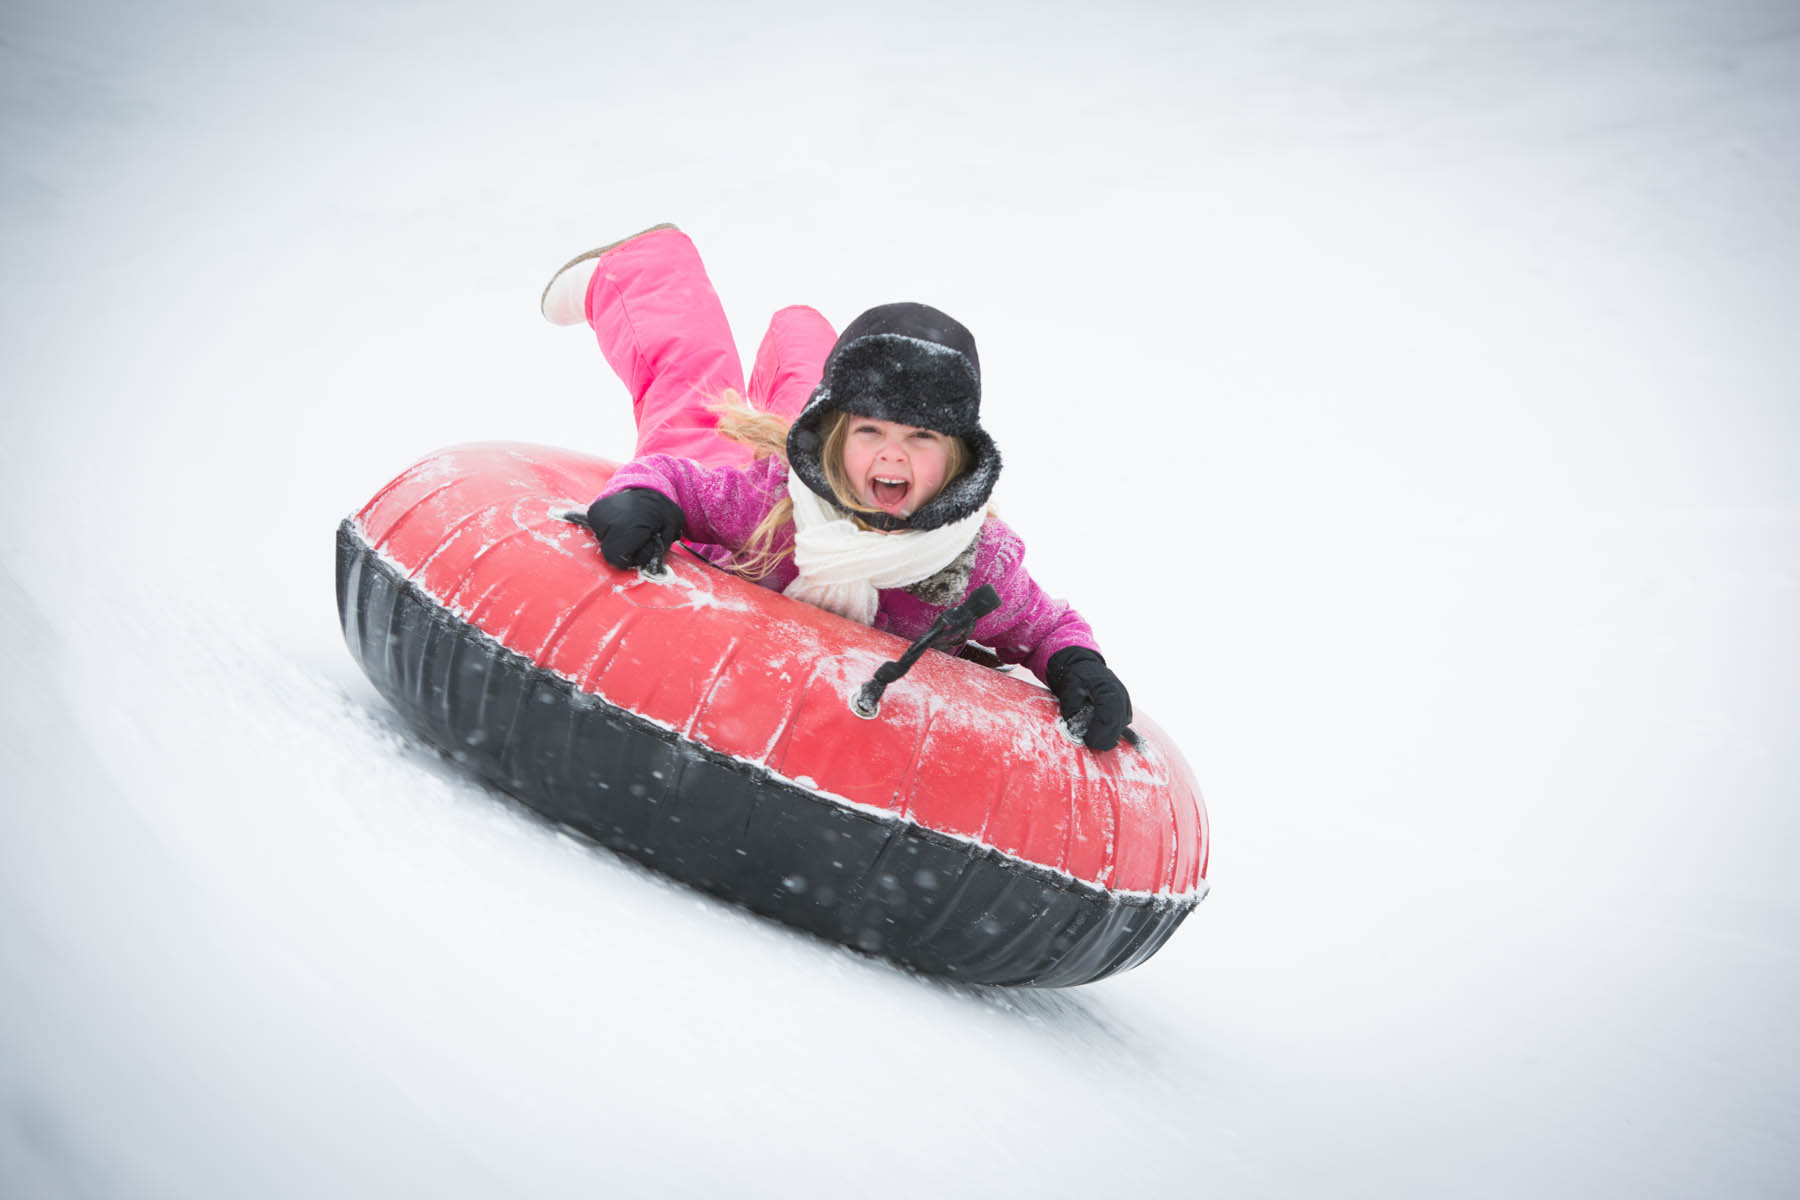 Young girl going downhill on an inner tube.